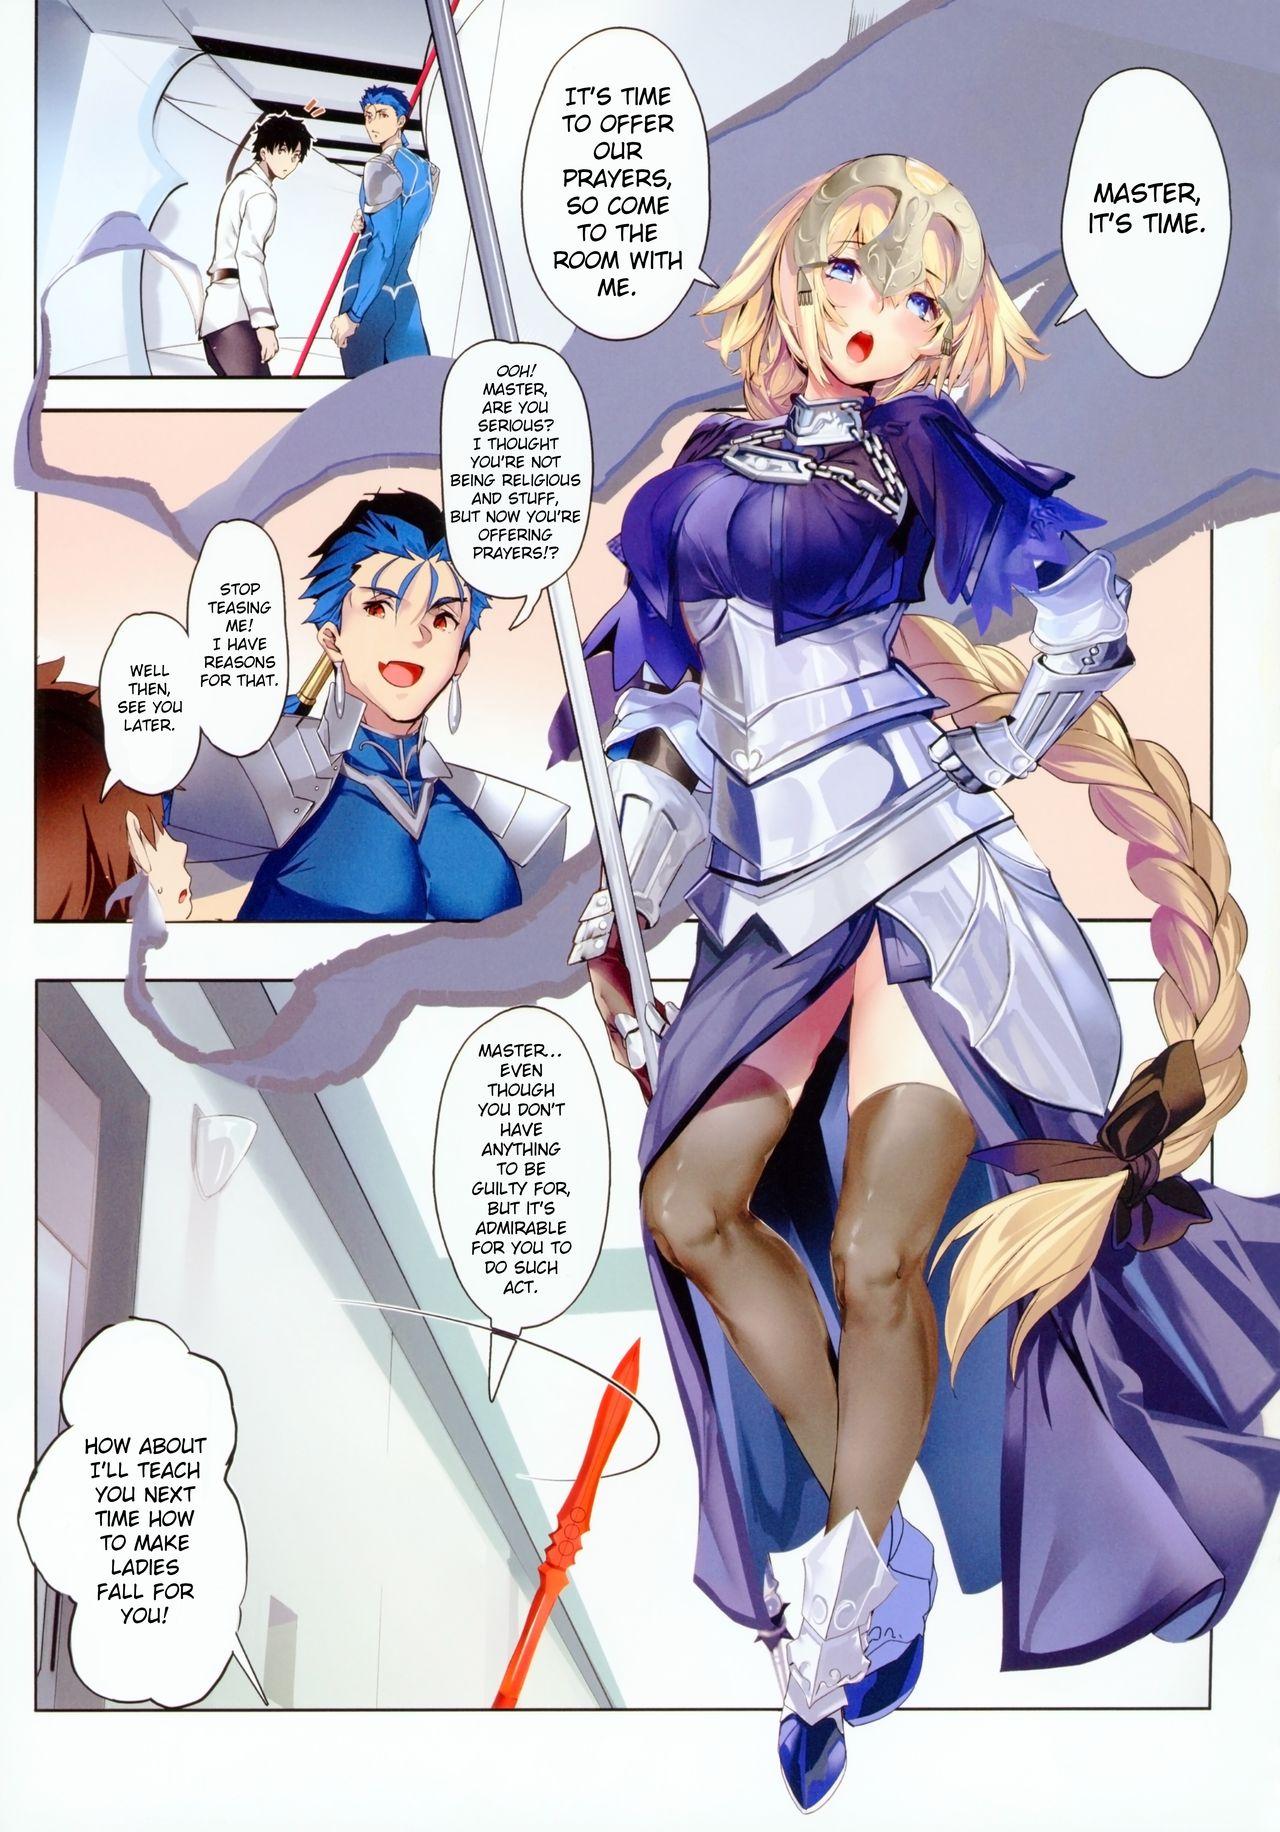 Clit Hishojo. - Fate grand order Gays - Page 2